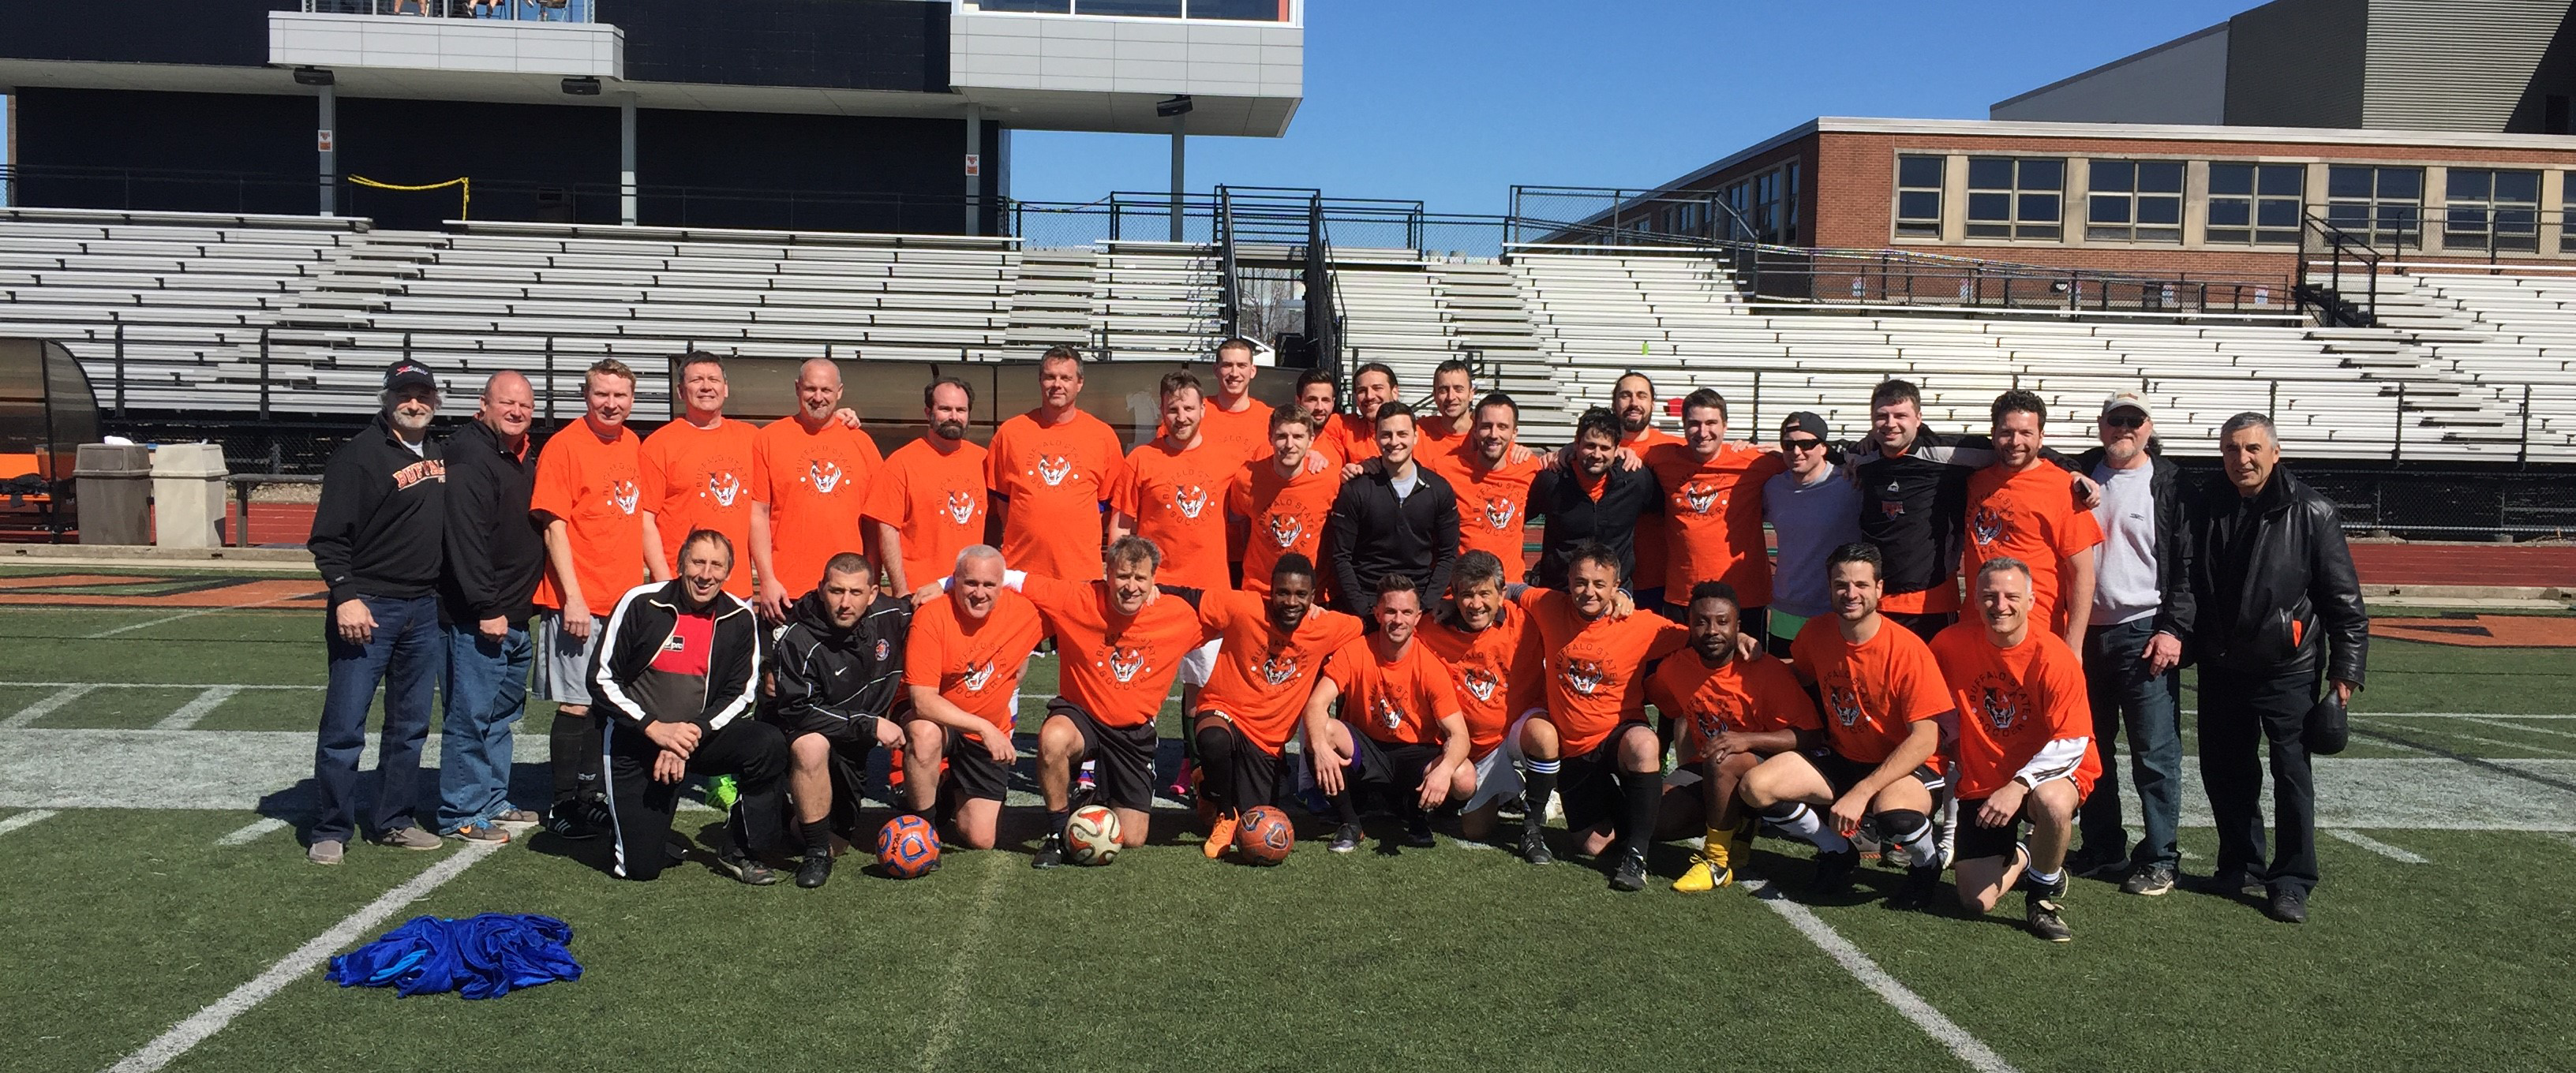 Join us for the annual men's soccer alumni weekend on May 5, 2018.